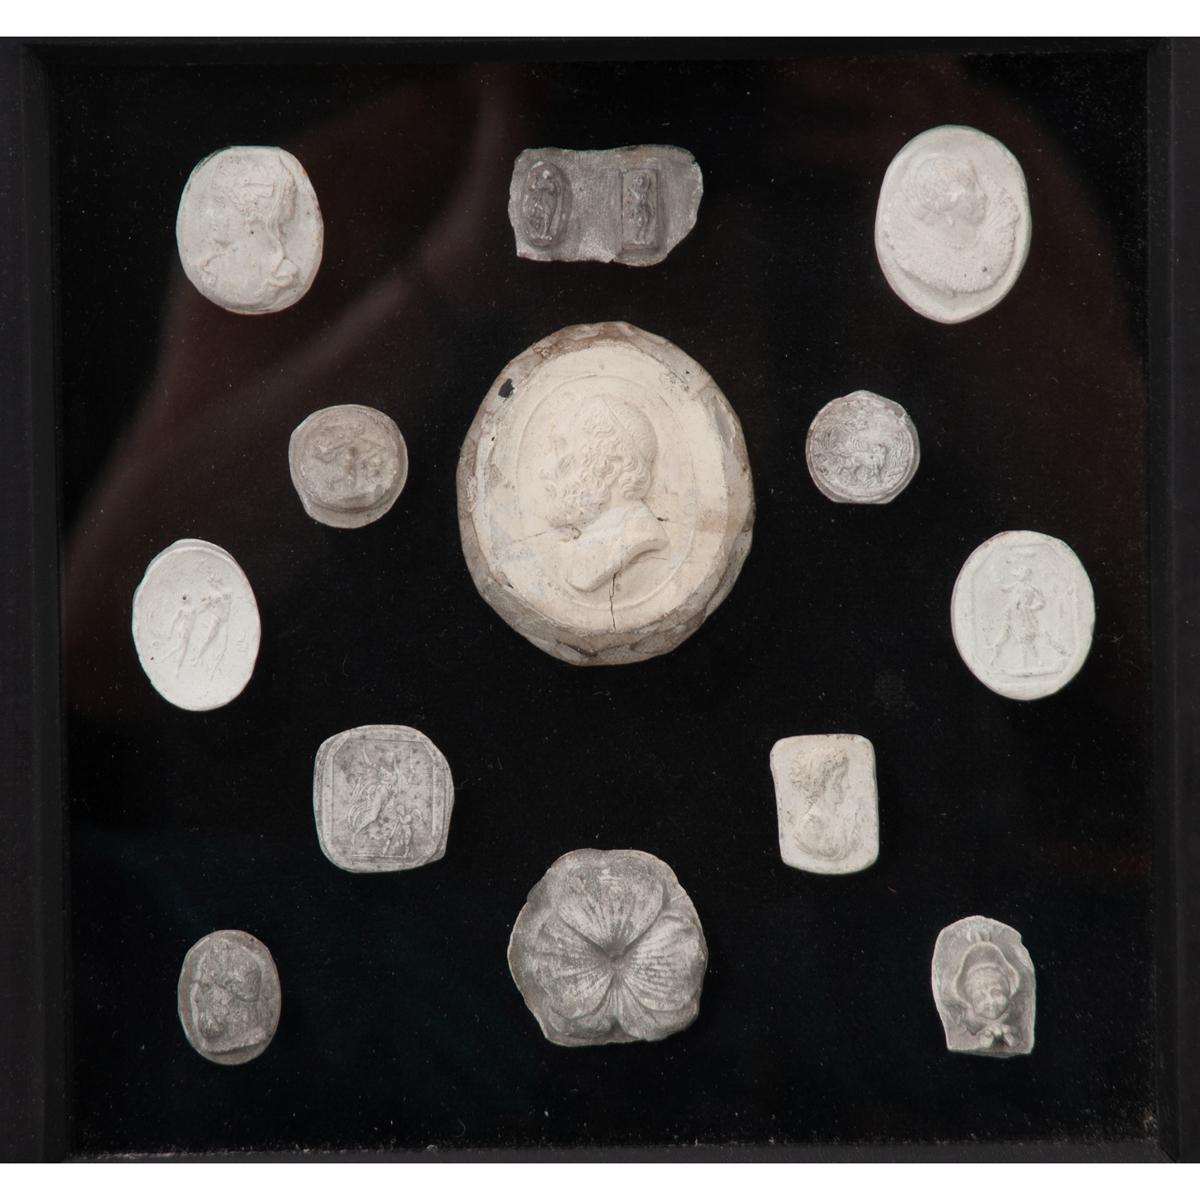 A wonderful collection of cast plaster intaglios. Mounted on black velvet and set in black shadow boxes, the contrast makes the intaglios stand out. All frames are the same size and will make a beautiful display.